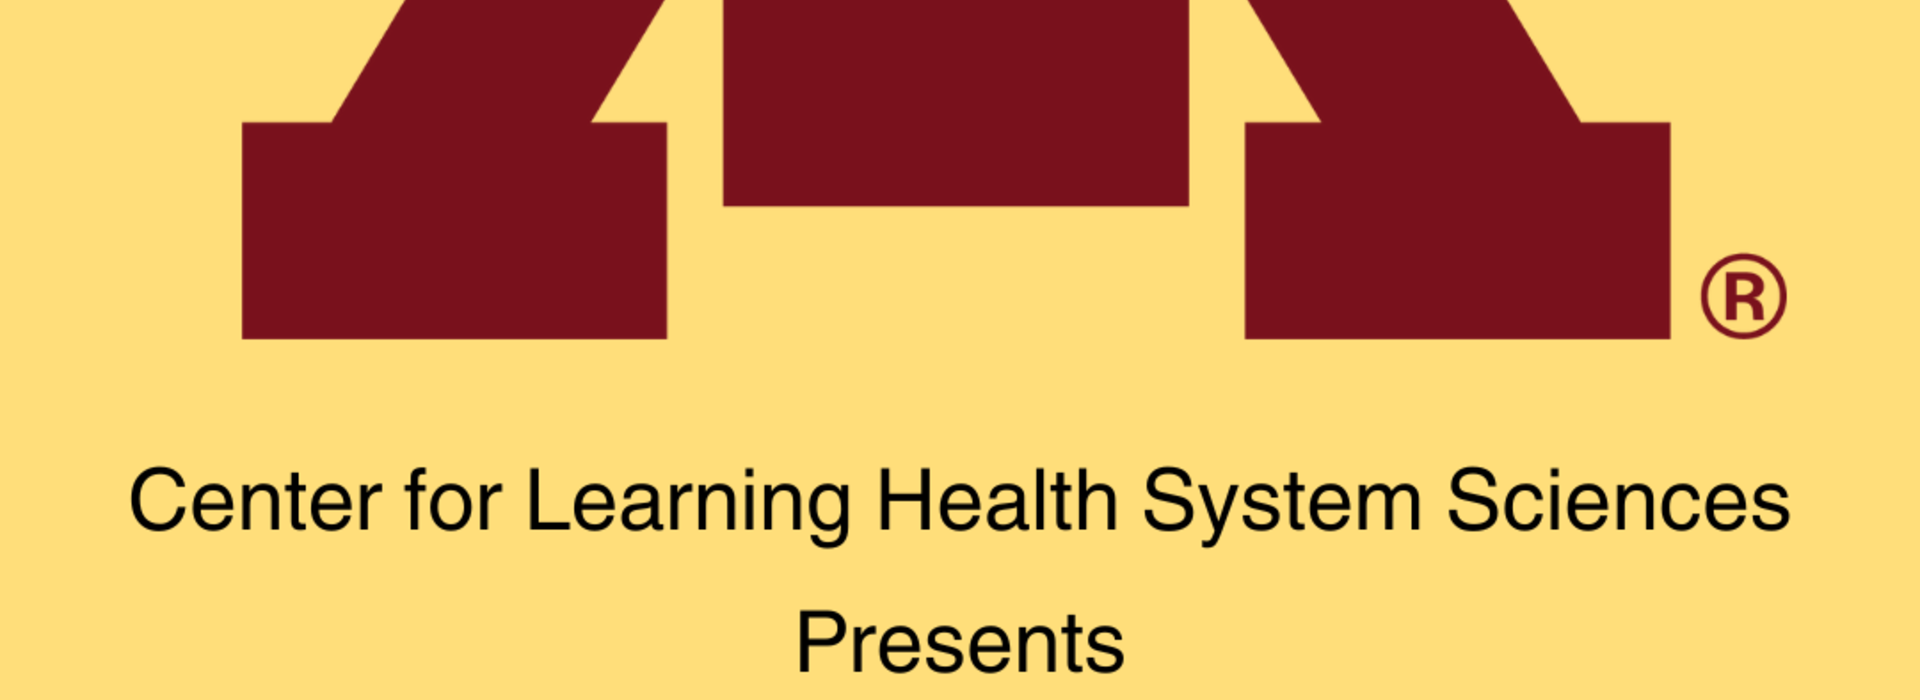 Graphic of University of Minnesota M logo with text that reads "Center for Learning Health System Sciences Presents Advances in Learning Health System Sciences Conference September 18–19"